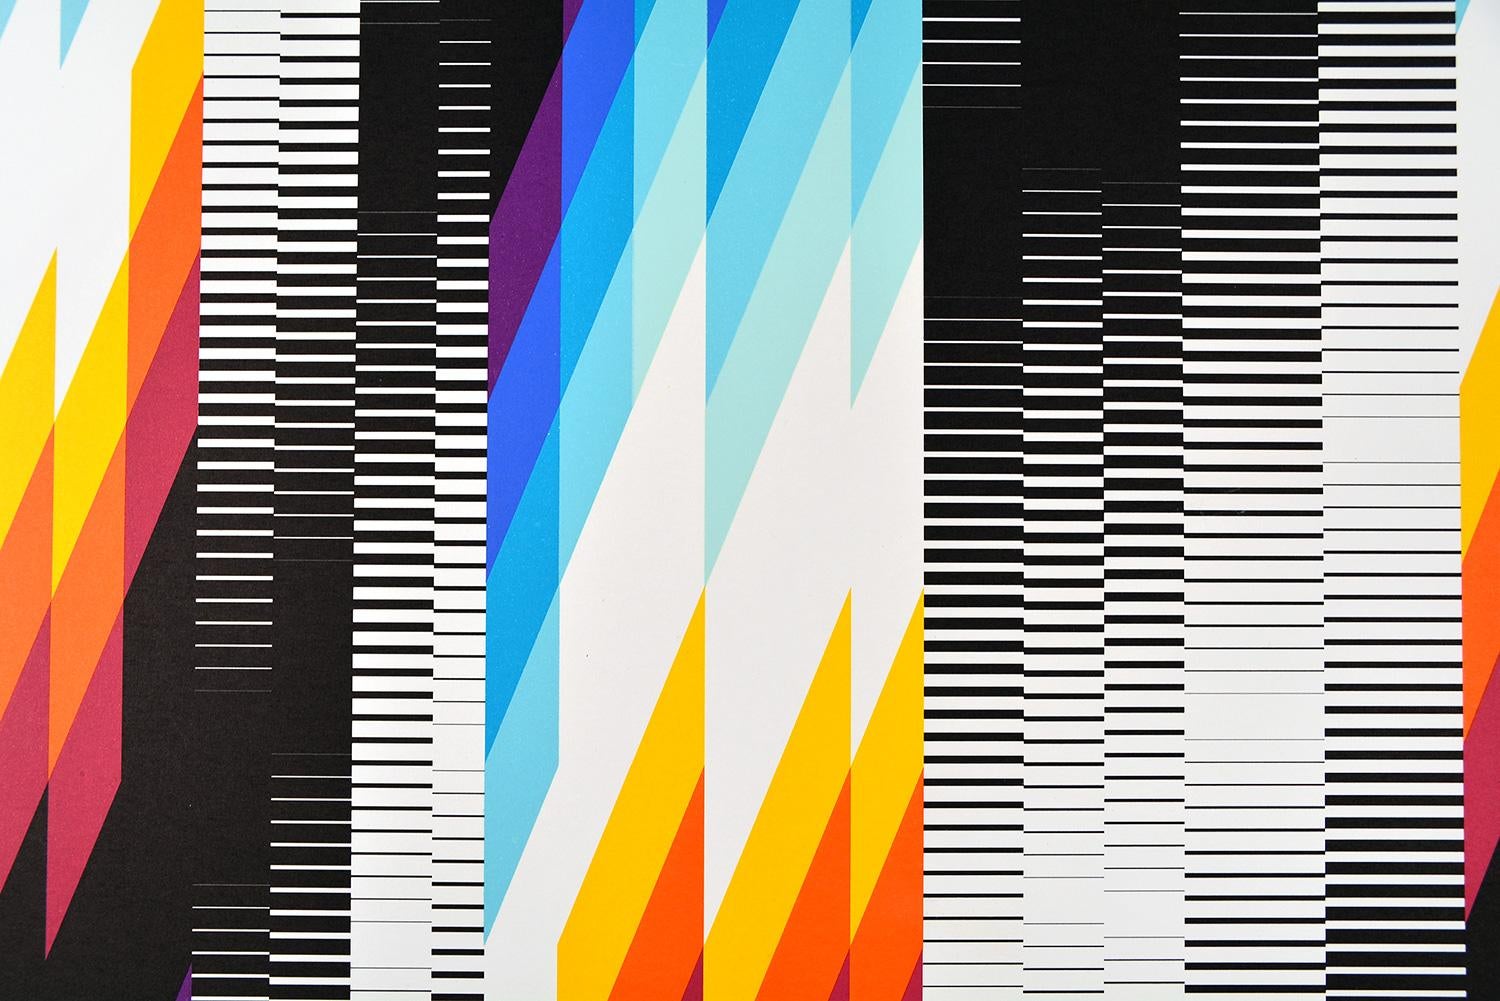 Felipe Pantone CHROMADYNA MICAP #2
Date of creation: 2020
Medium: Lithograph on paper
Edition number: 24/30
Size: 75.5 x 55.5 cm
Condition: New, in mint condition and never framed
Lithograph on paper hand signed and numbered on the back by the